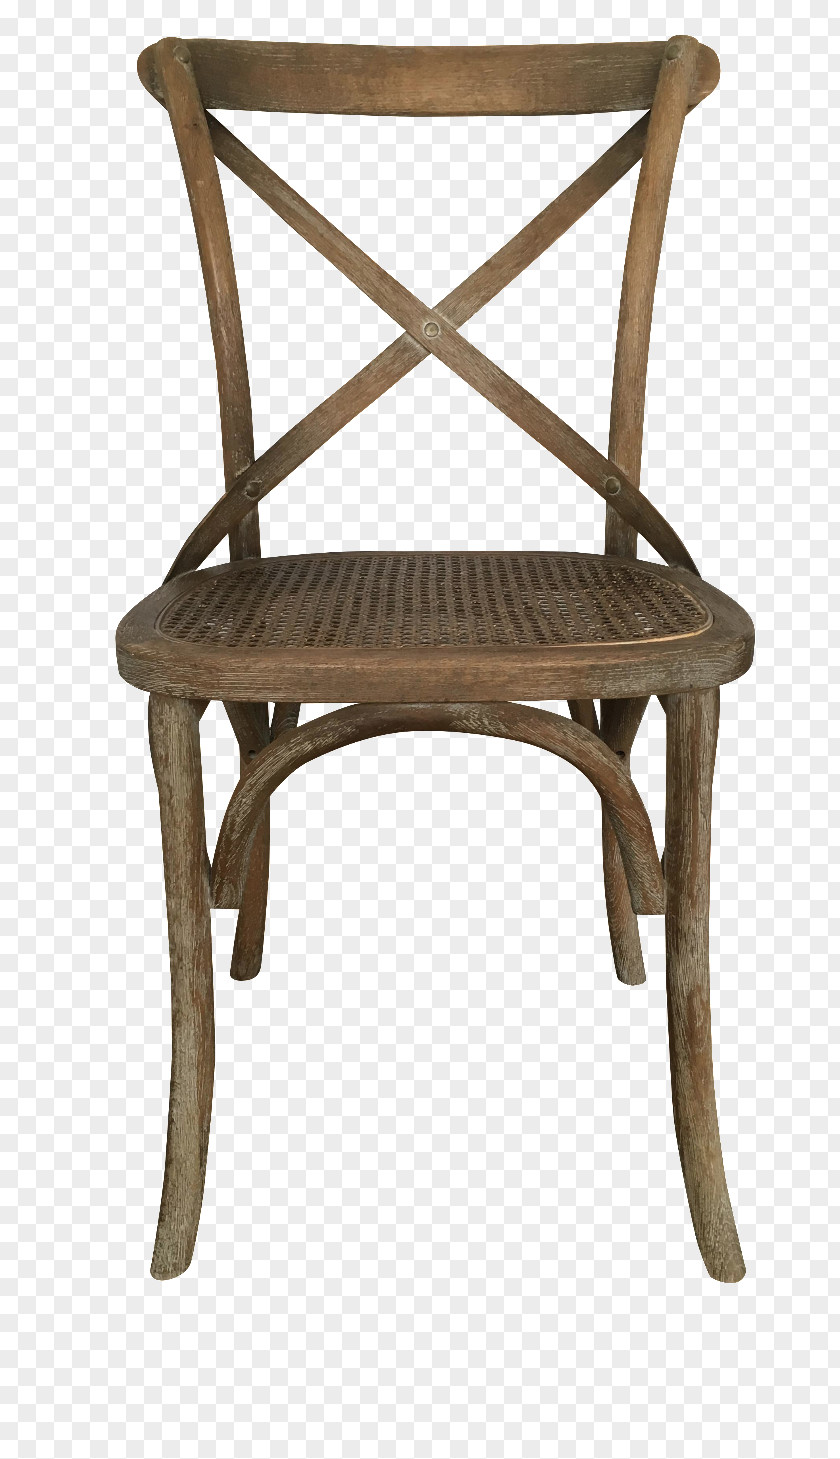 Table Dining Room Chair Furniture Kitchen PNG